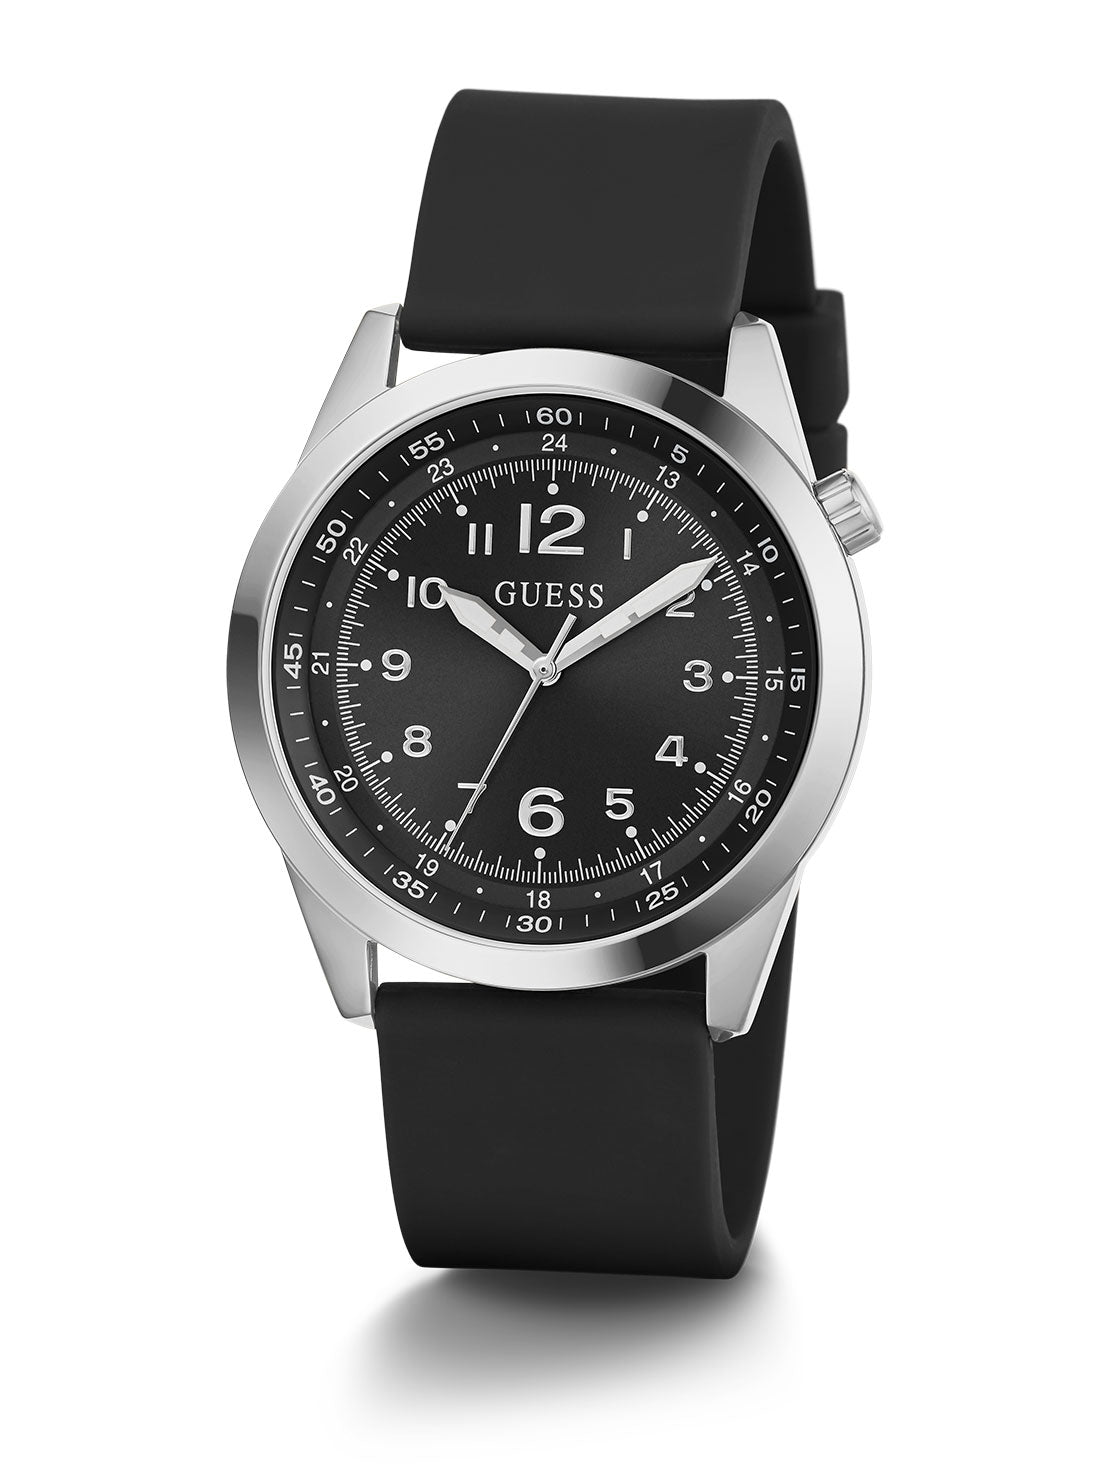 GUESS Men's Black Silver Max Silicone Watch GW0494G1 Full View